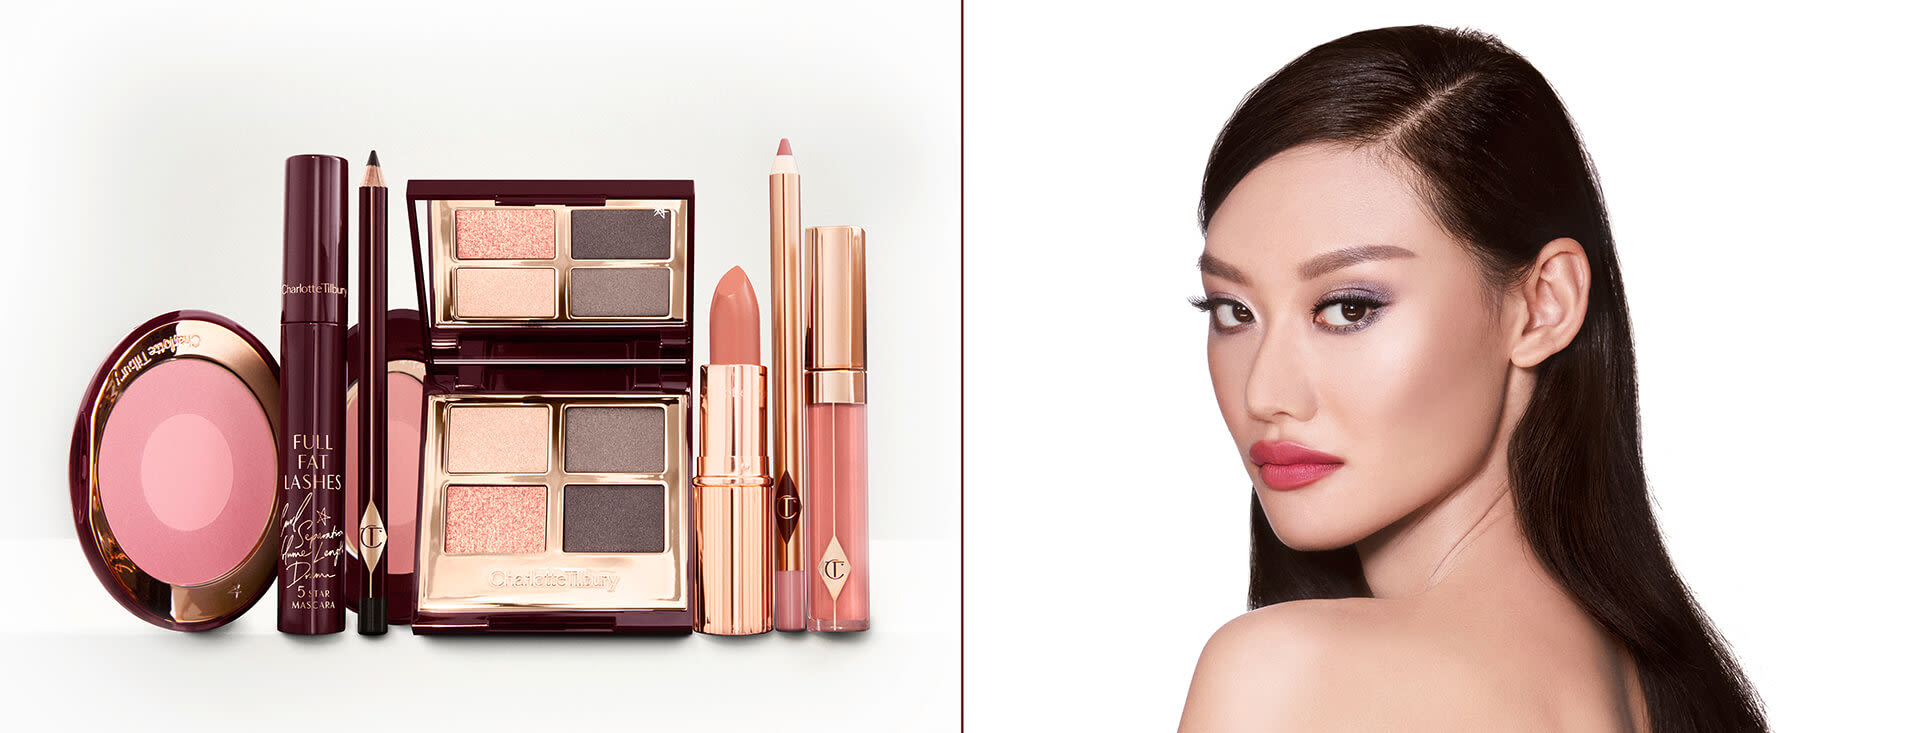 A fair-tone model with brown eyes wearing shimmery lilac and champagne eye makeup with nude pink blush and coral lipstick with gloss on top, along with an open, mirrored-lid eyeshadow palette in matte and shimmery gold and grey shades, an open black eyeliner pencil, a mascara in a dark-crimson colour scheme, a golden-peach lipstick with a matching lip liner pencil, coral lip gloss, and an open two-tone blush in cool pink. 